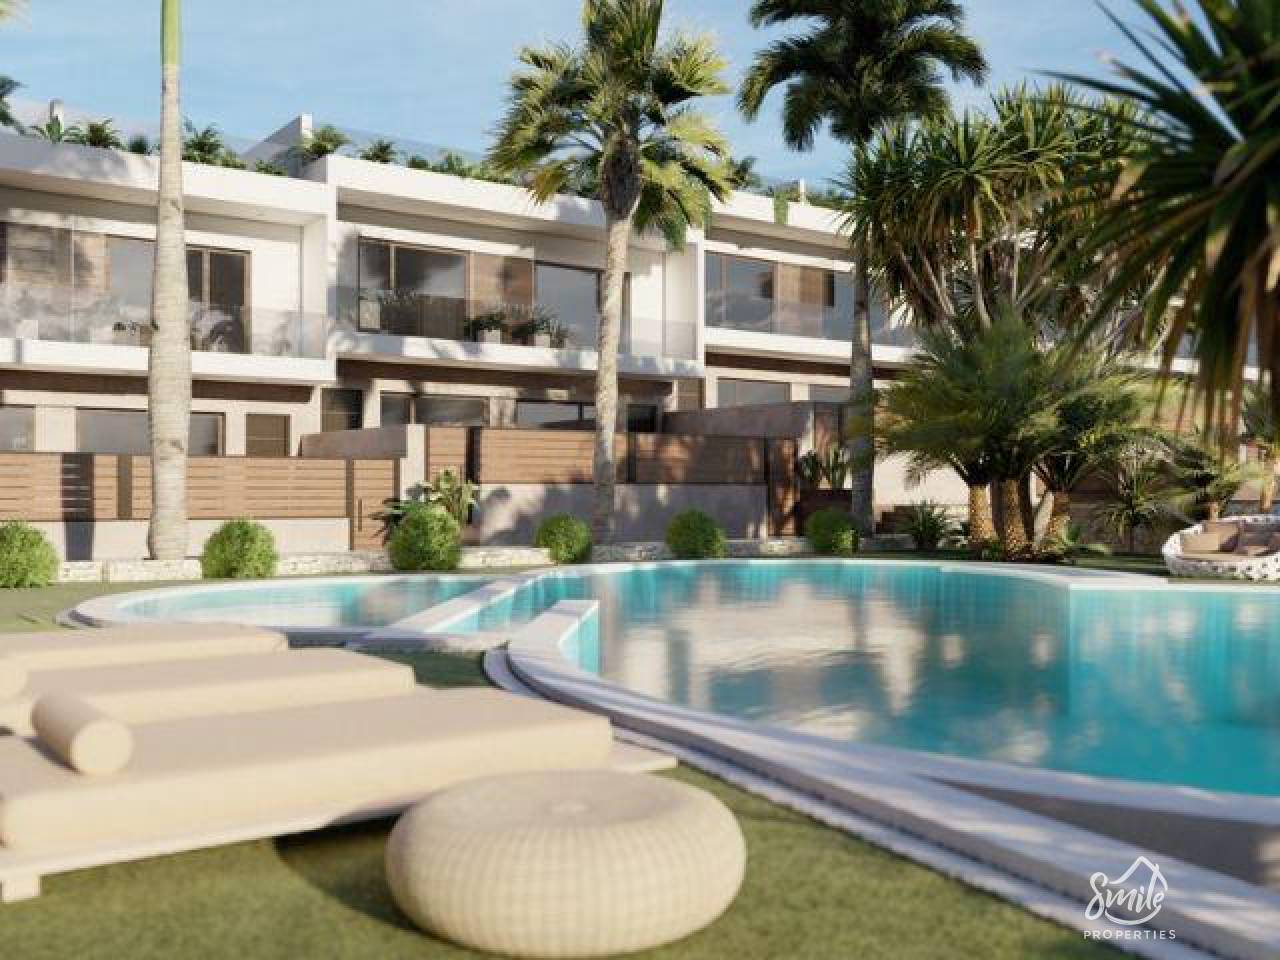 New Build - Terraced house - Torrevieja - Los balcones